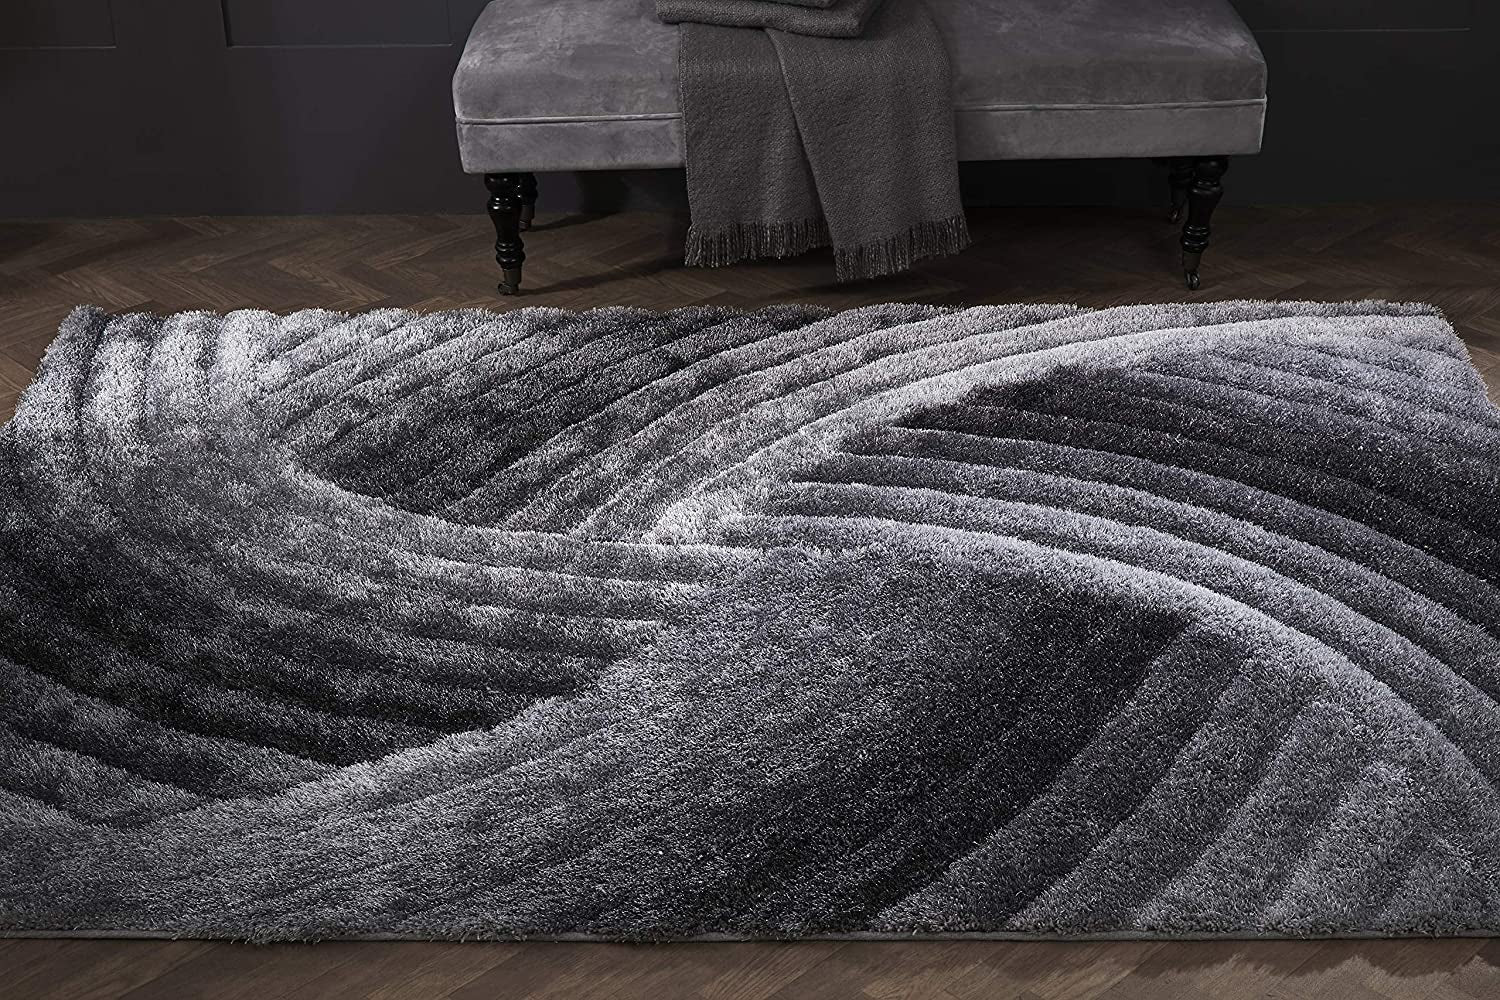 3D SWIRL HEAVYWEIGHT CARVED Shaggy Rug GREY SILVER Ombre Super Plush Extra Large Rugs Living Room with SHIMMERING SPARKLE STRANDS Thick Pile Height Modern Area Rugs (160Cm X 230Cm (5.5Ft X 7.5Ft))